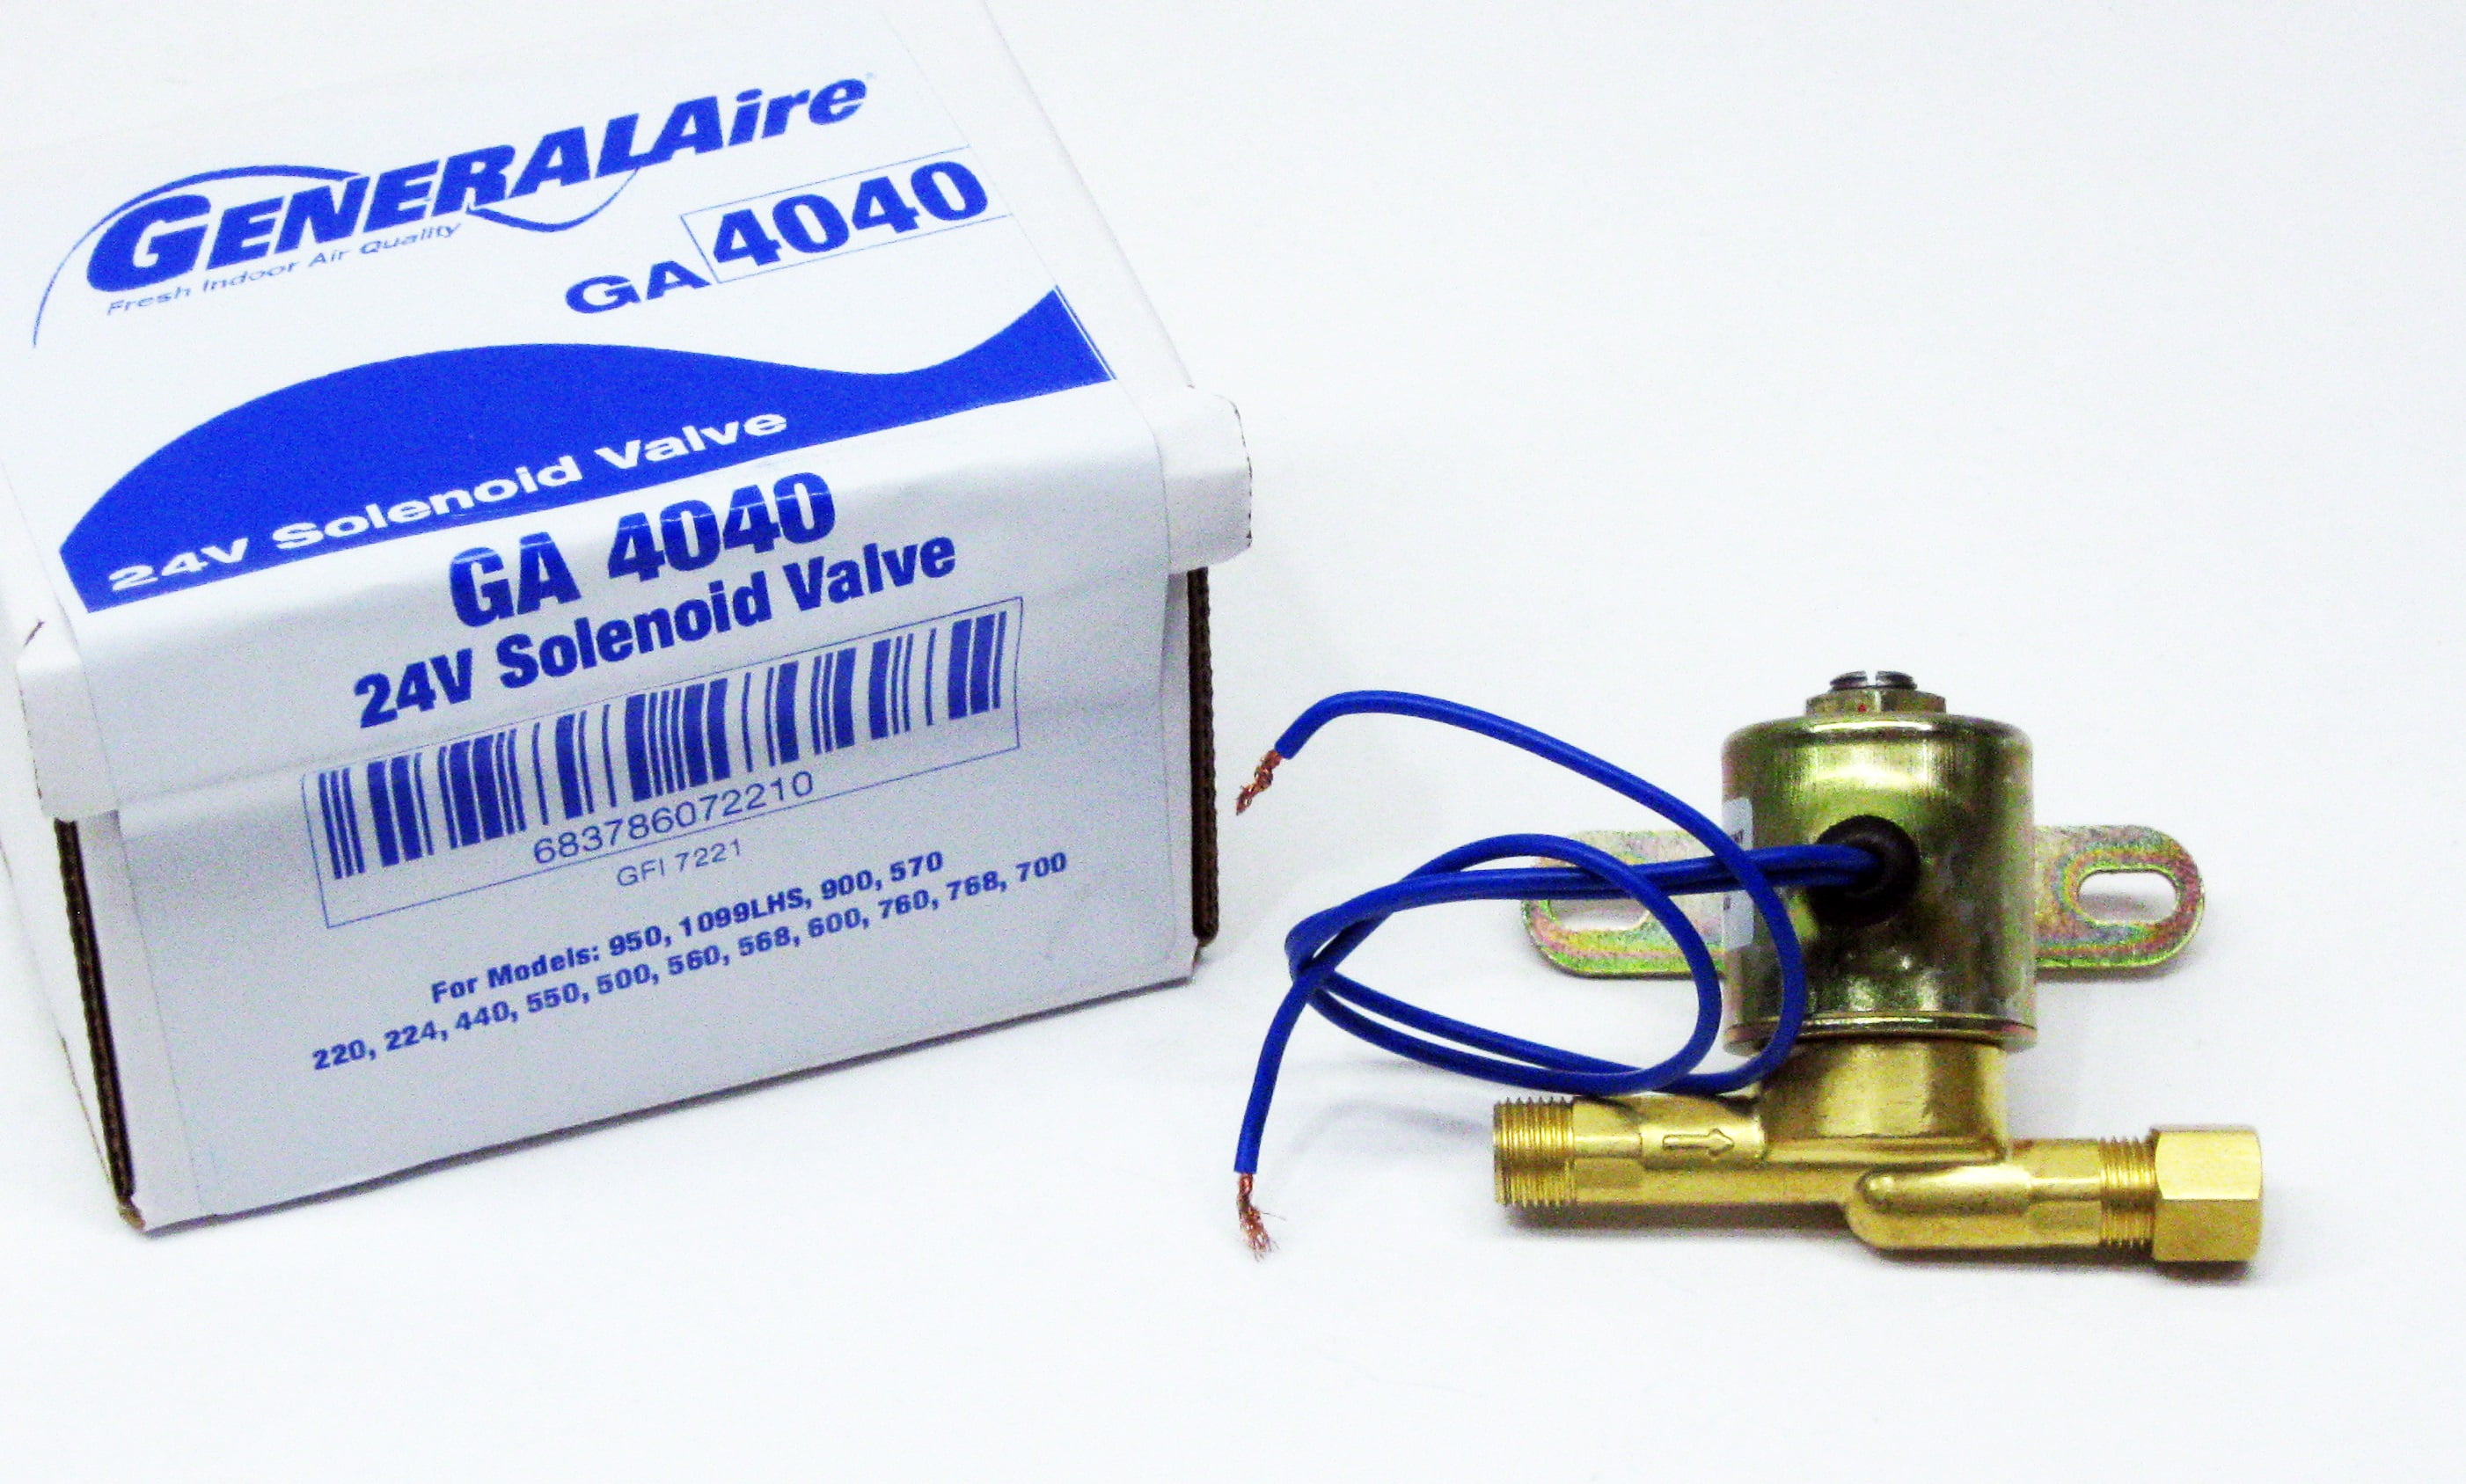 Fuels DC24V Electric Solenoid Valve Humidifier Valve, for Water Air Gas